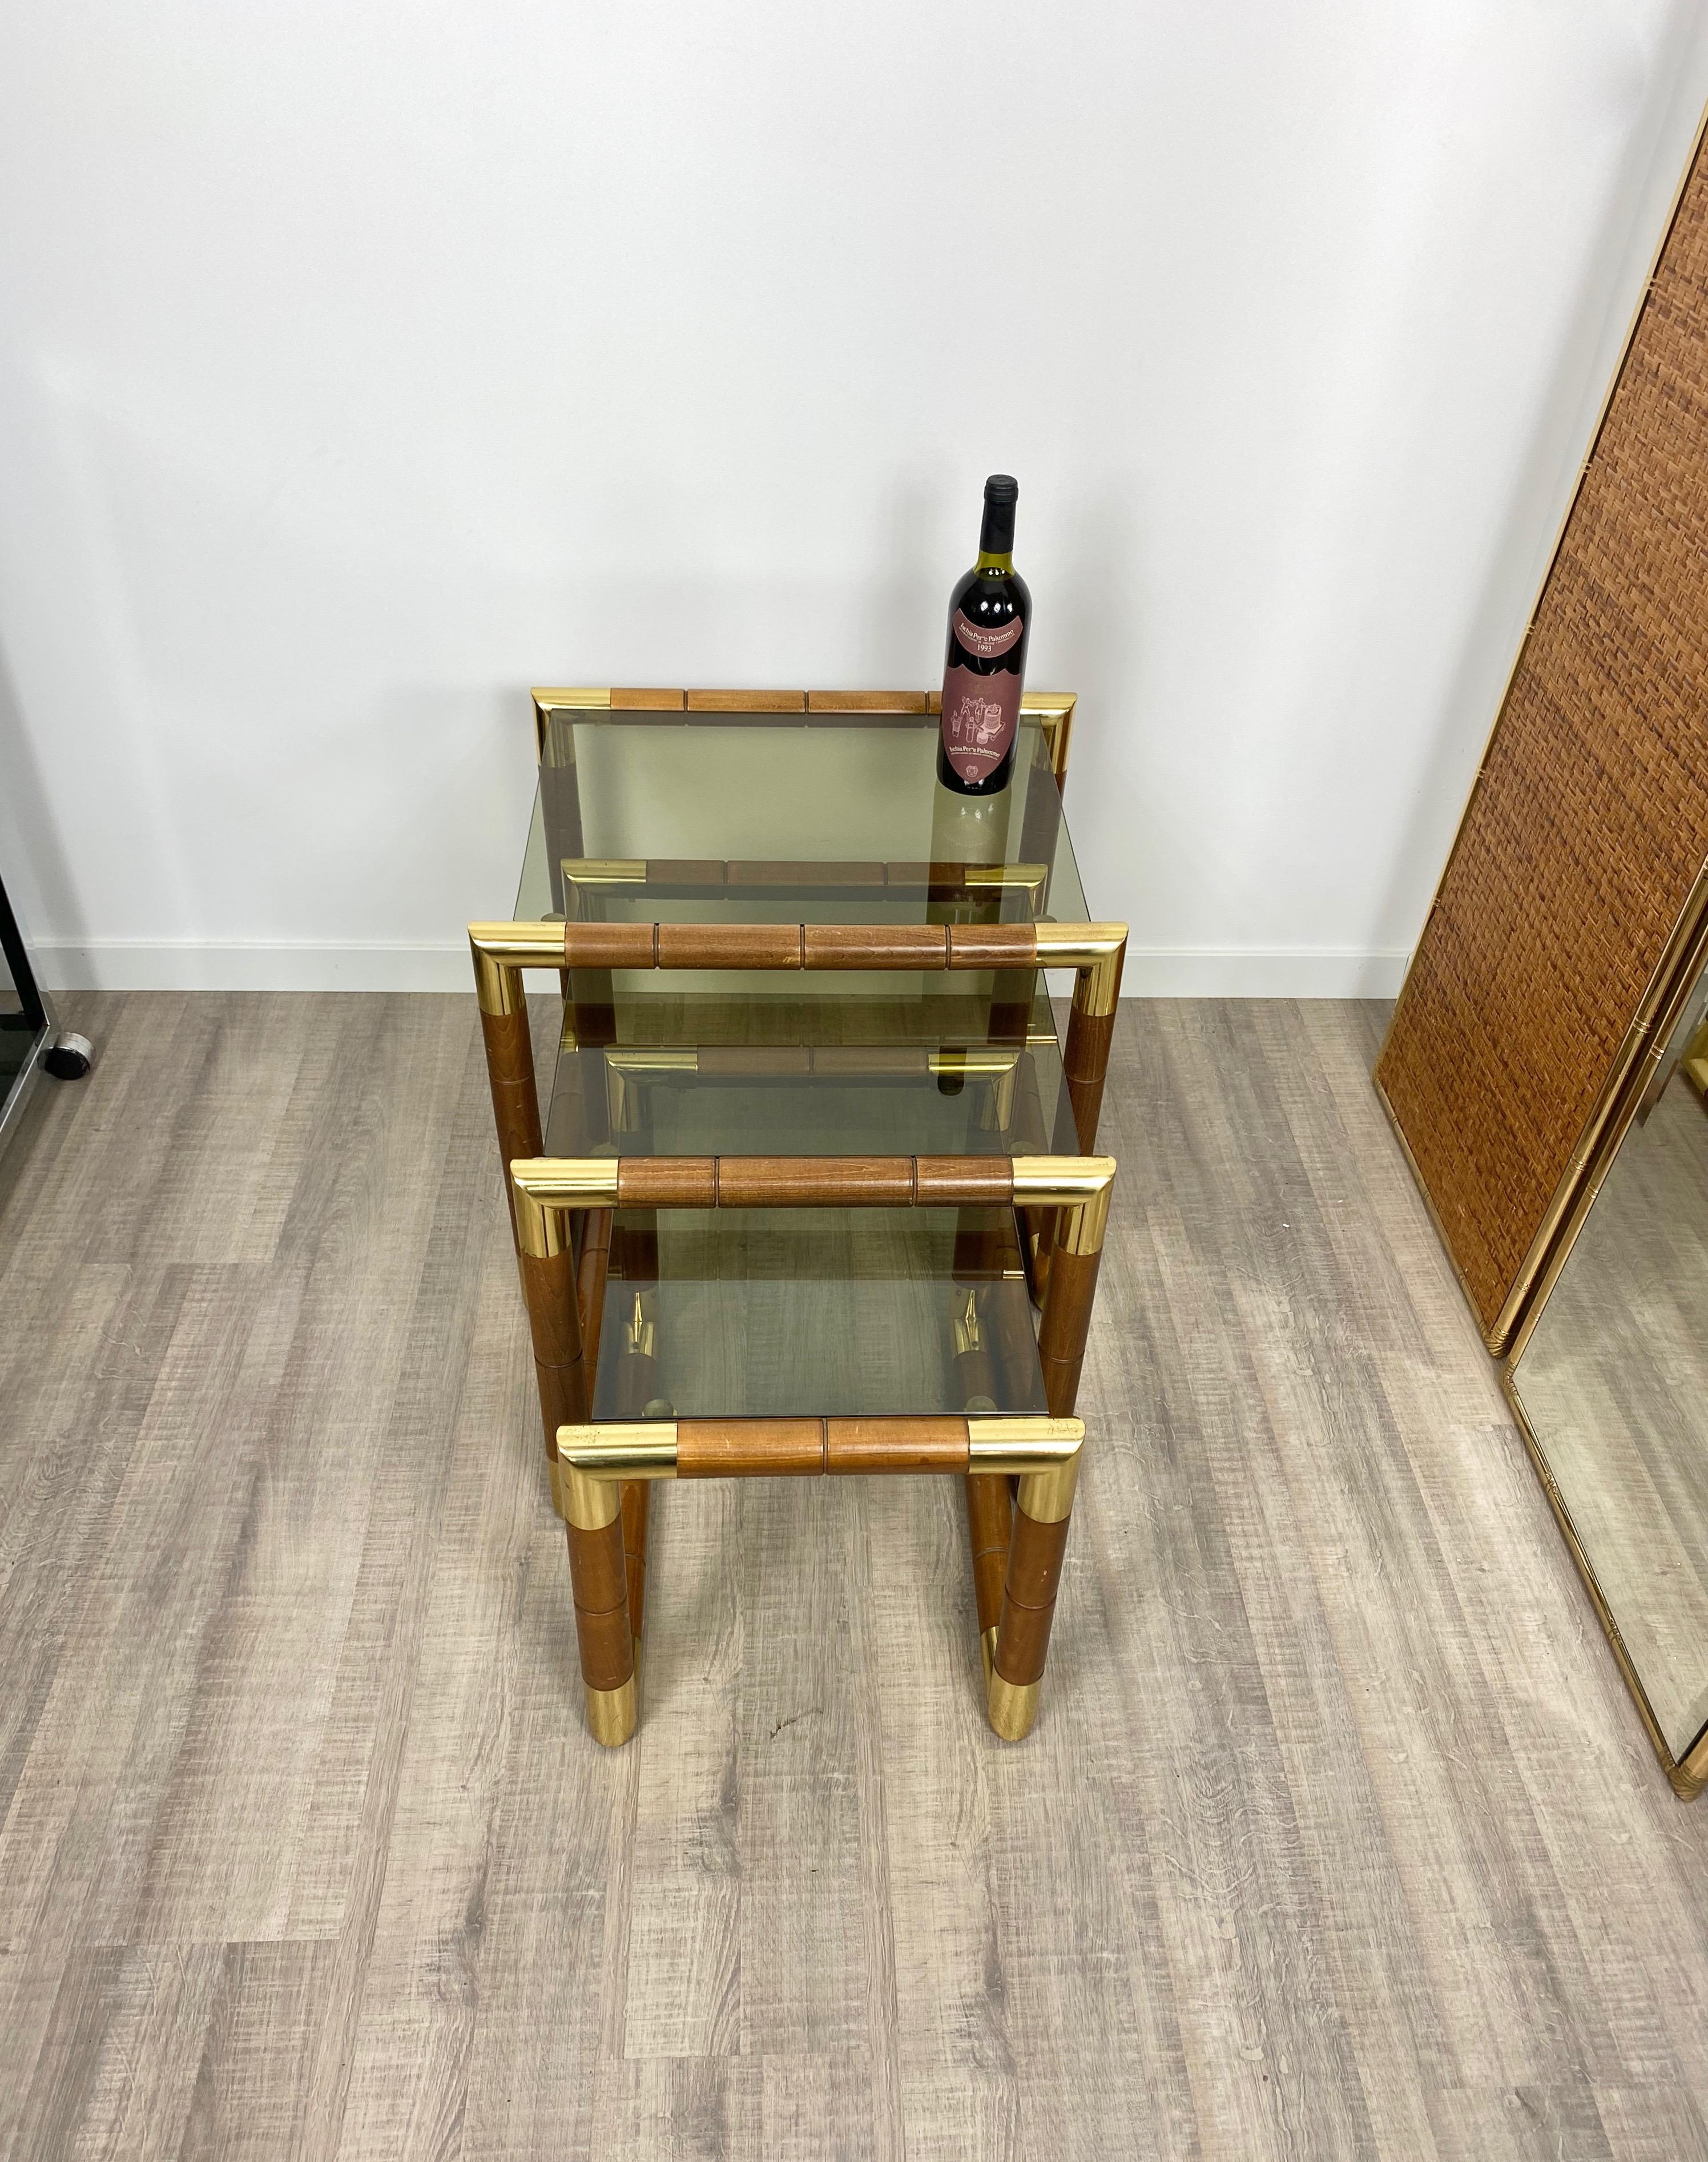 Three nesting tables featuring a wooden structure with brass corners and glass shelves in decreasing sizes. 

Dimensions: 
Biggest: 47cm height x 56 width x 47cm depth 
Middle: 43 x 46 x 47 cm
Smaller: 37.5 x 36 x 47 cm.